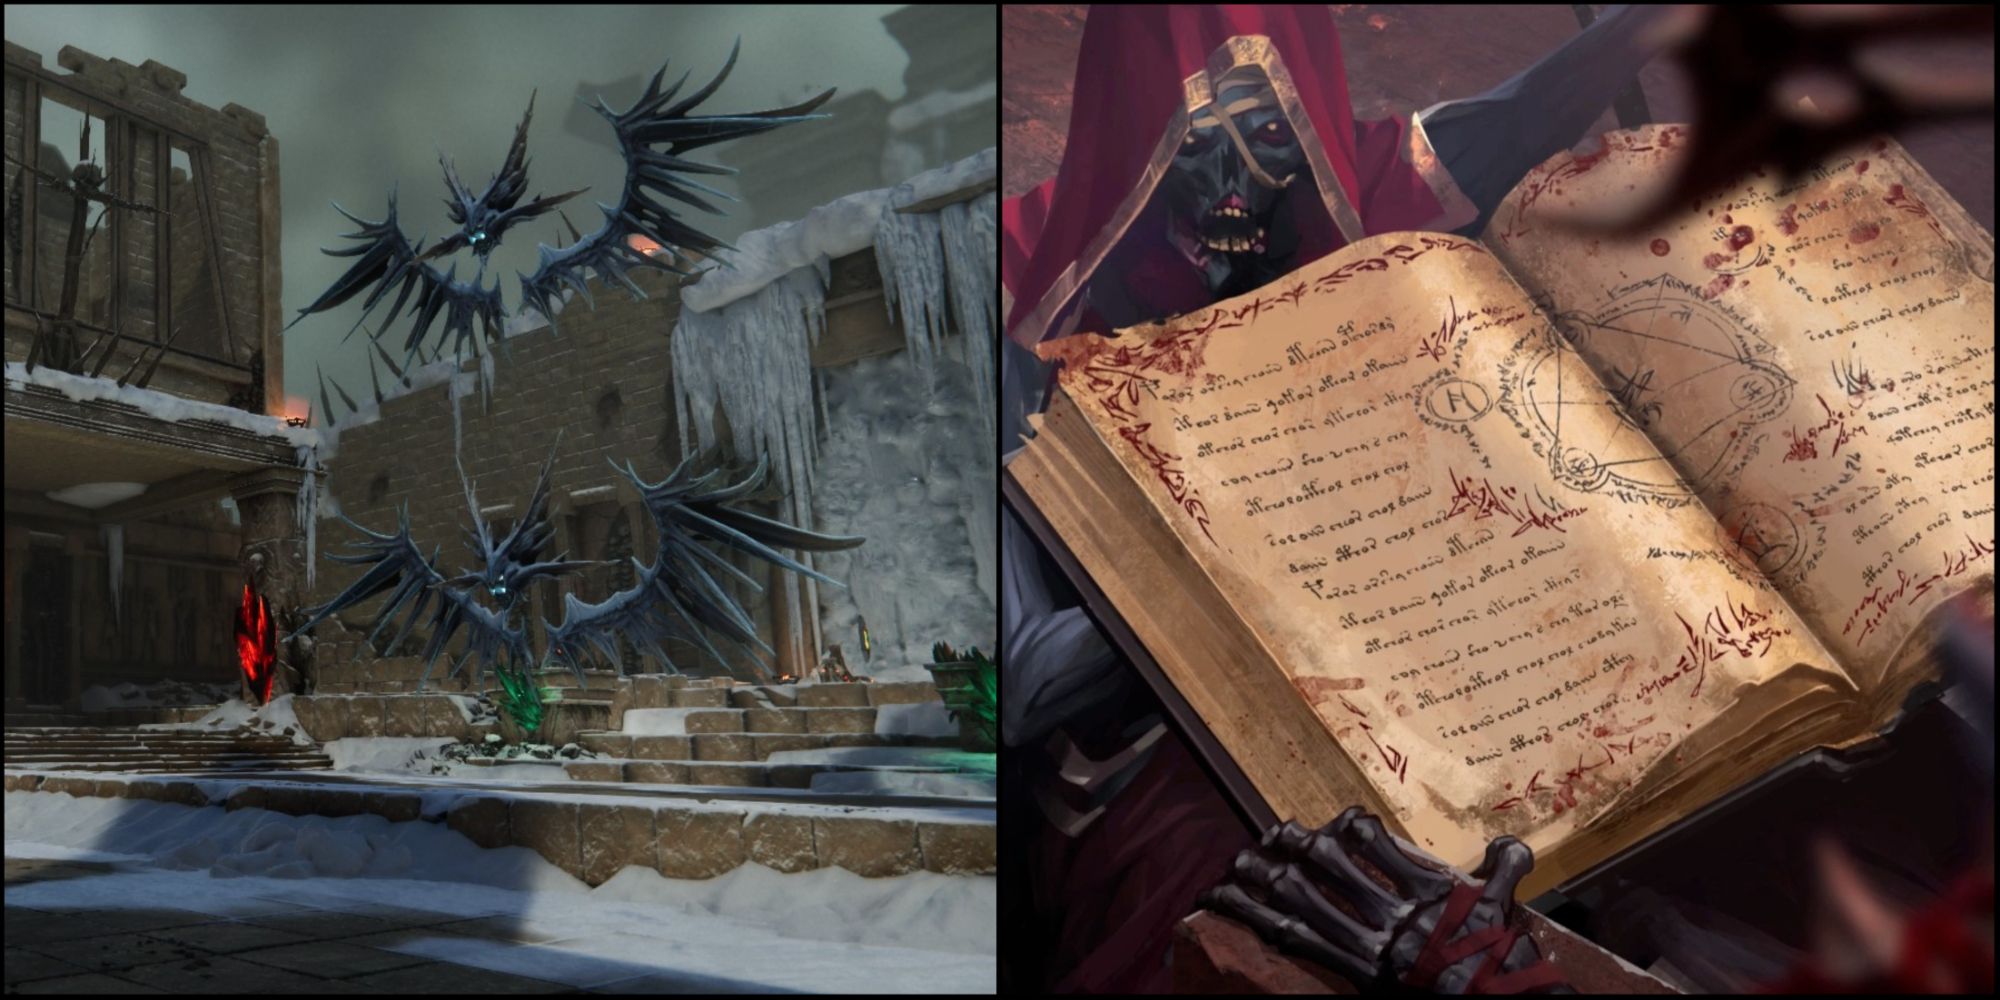 Two aspects on the left, a book of forbidden spells on the right.